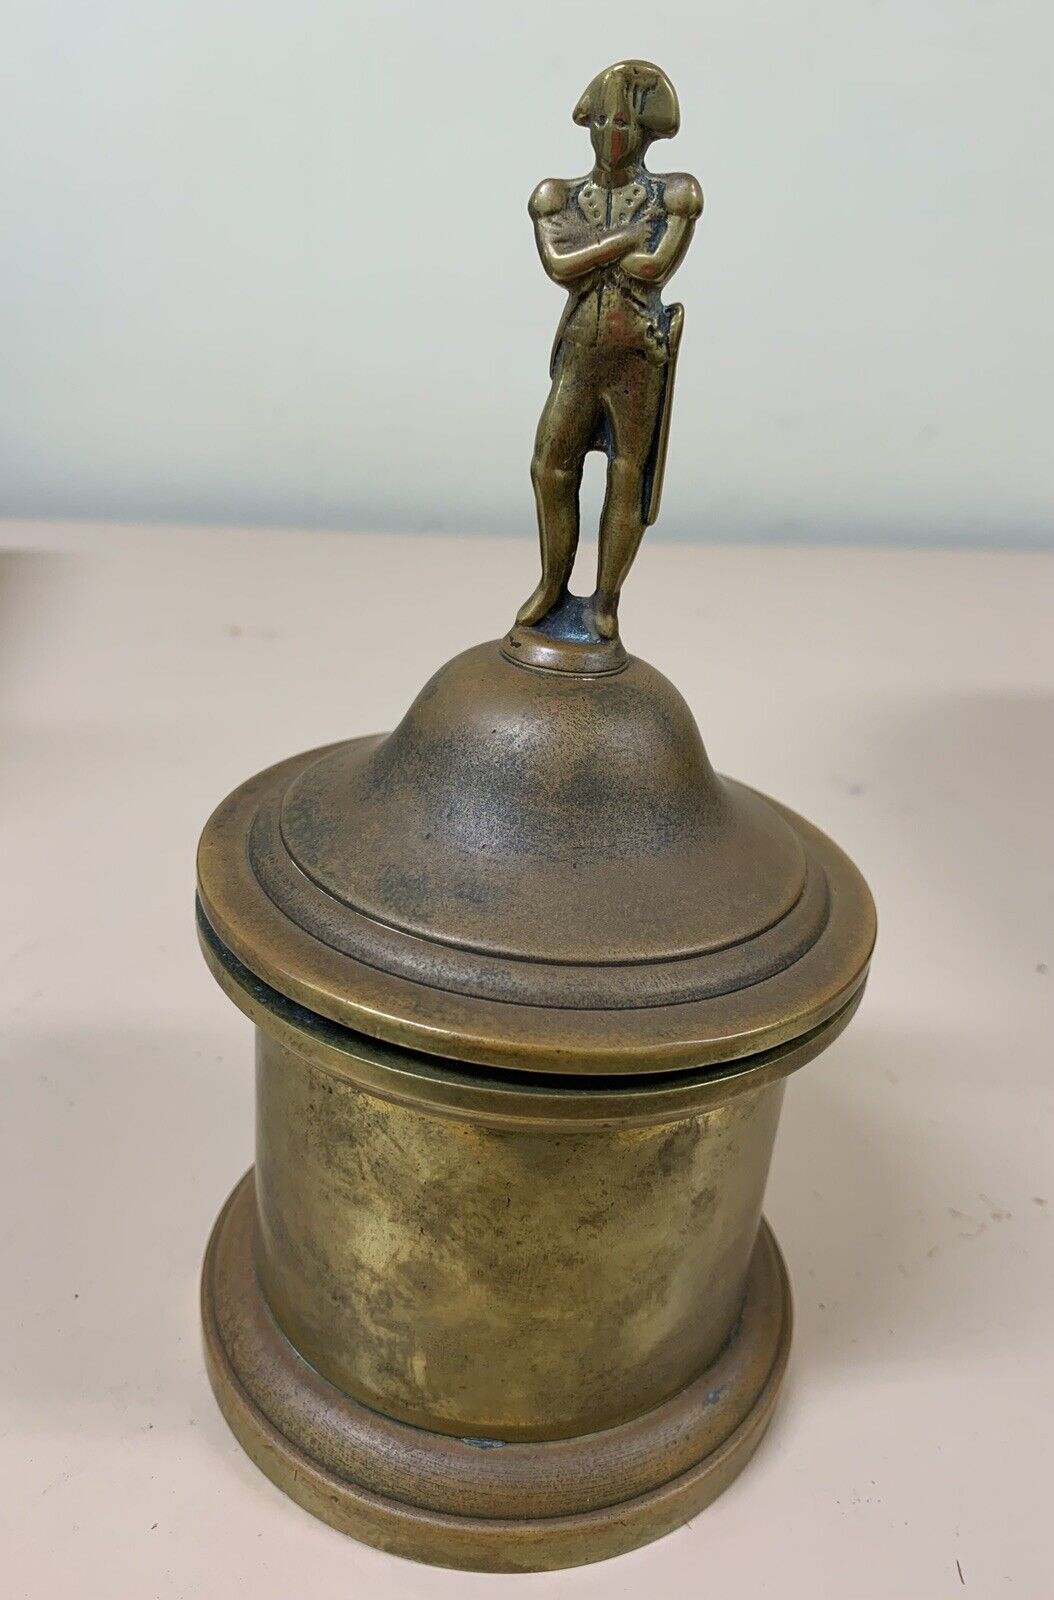 Napolean Figurine Antique Heavy Brass Container With Lid